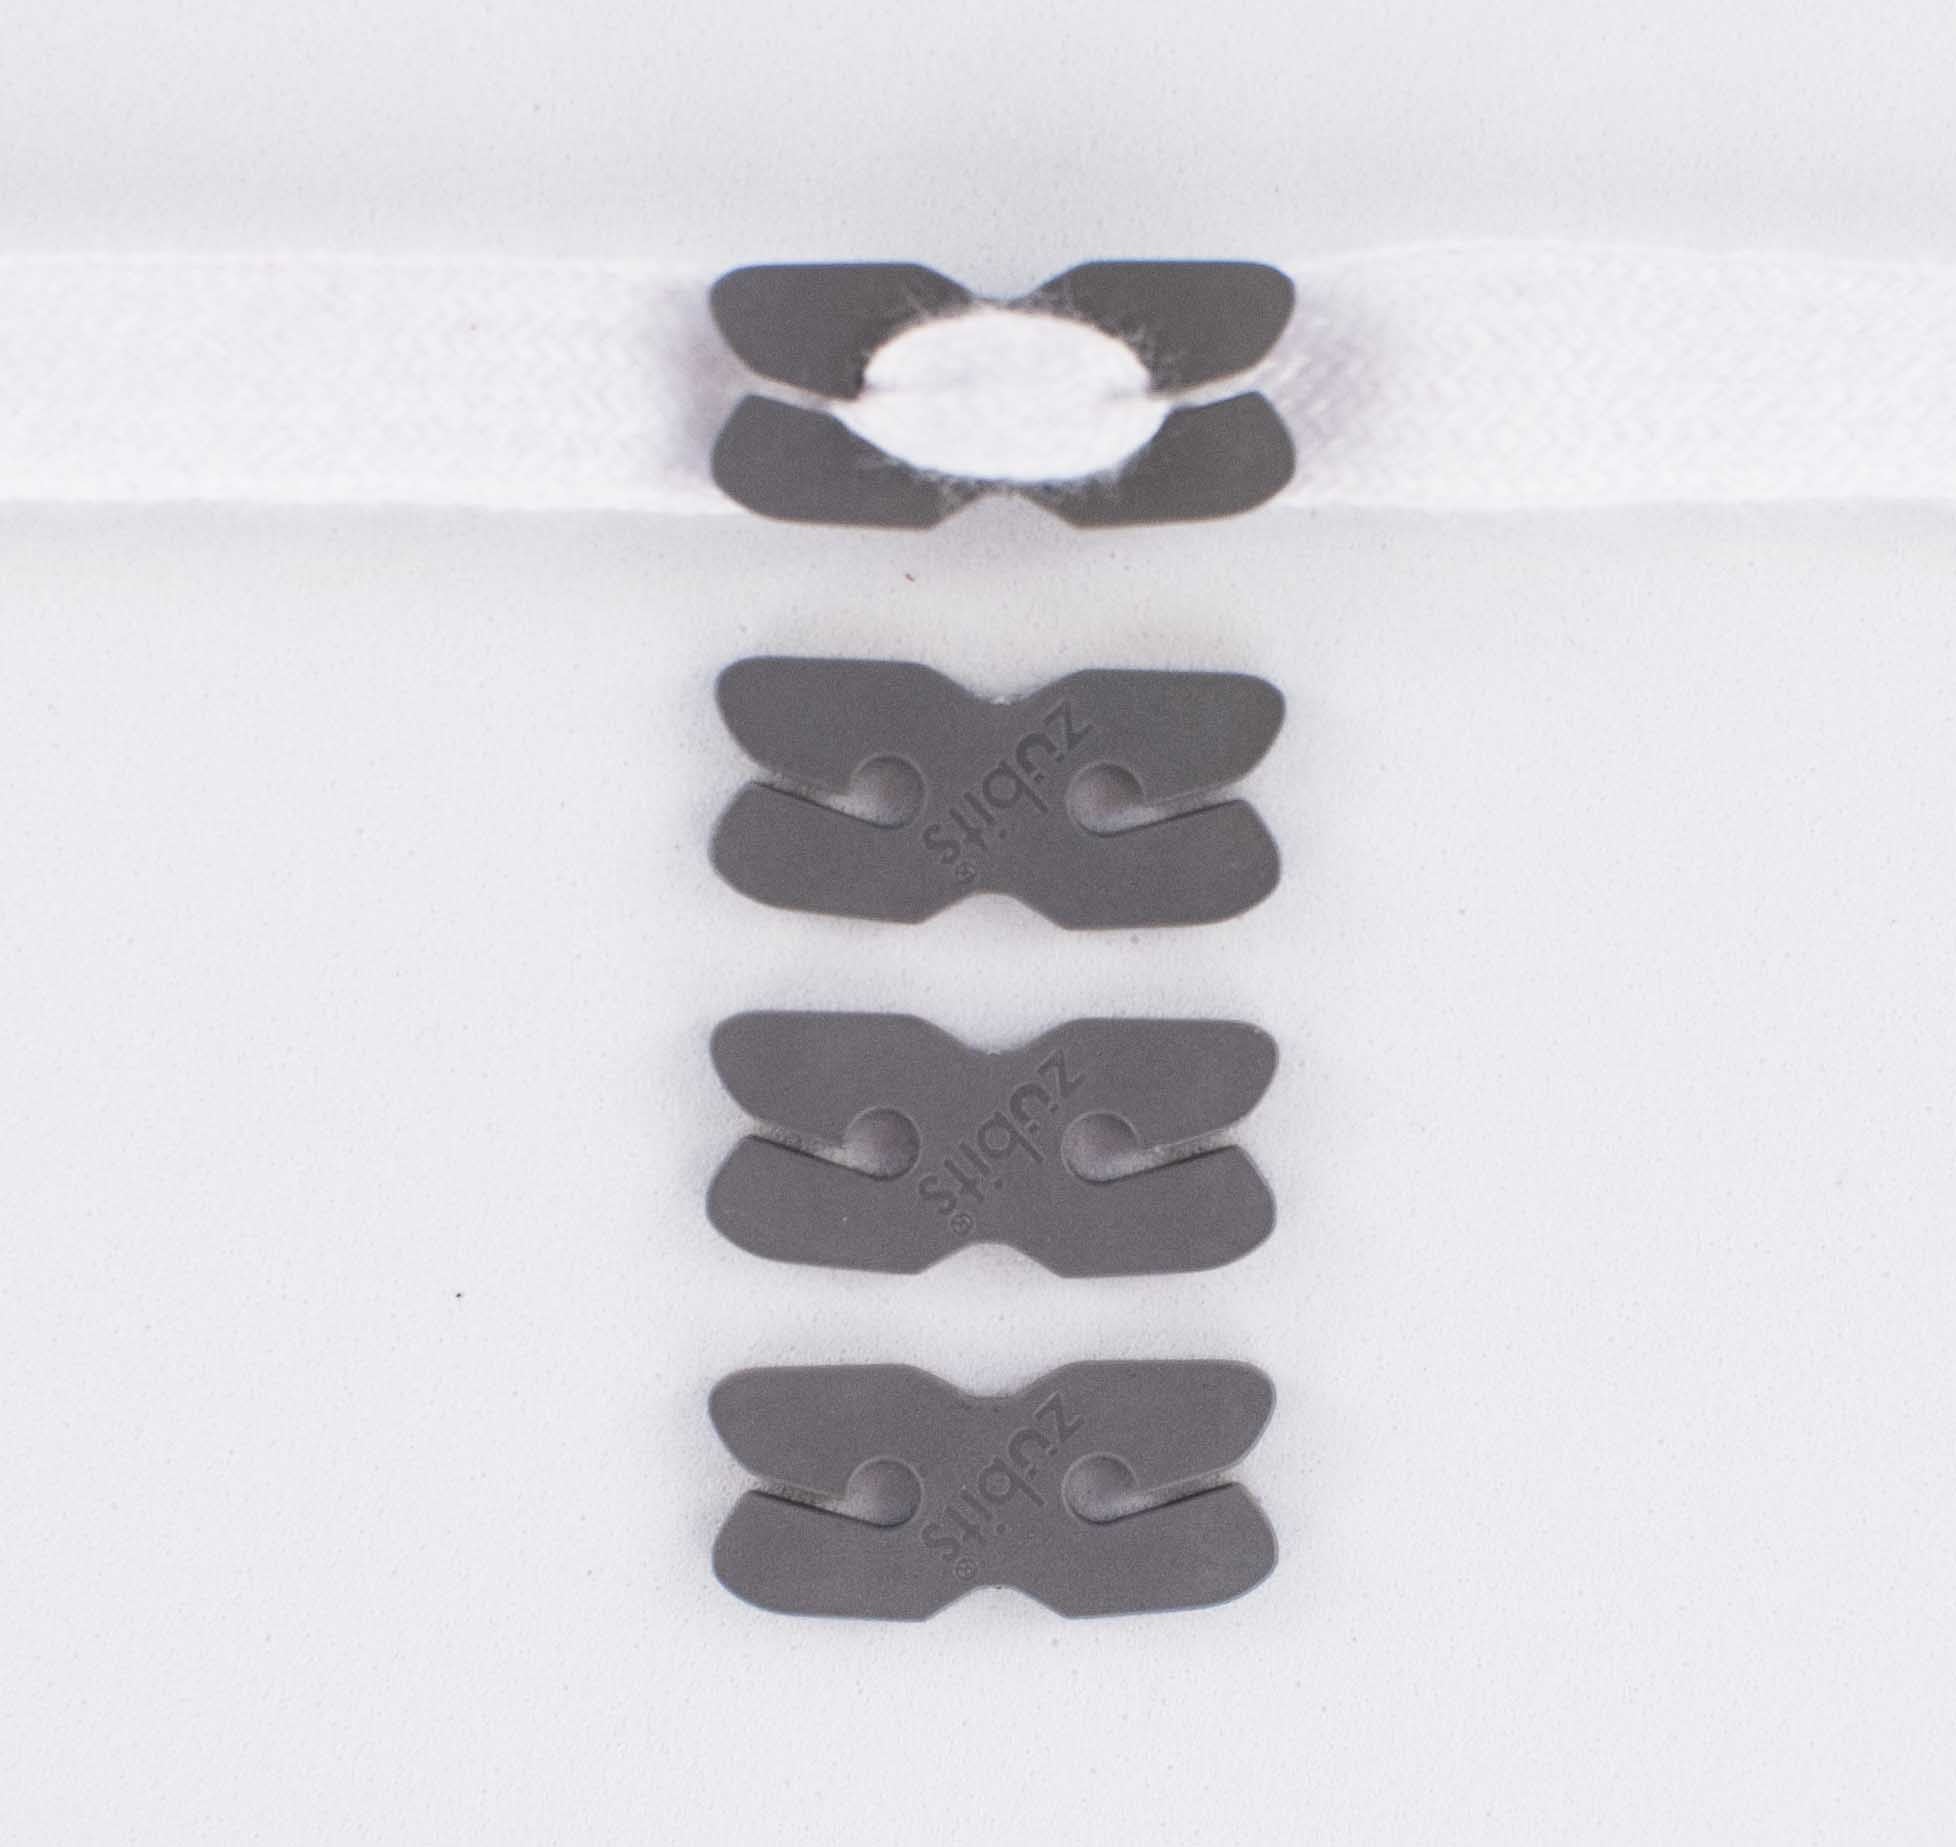 Zubits® Z-lace™ lace securing clips